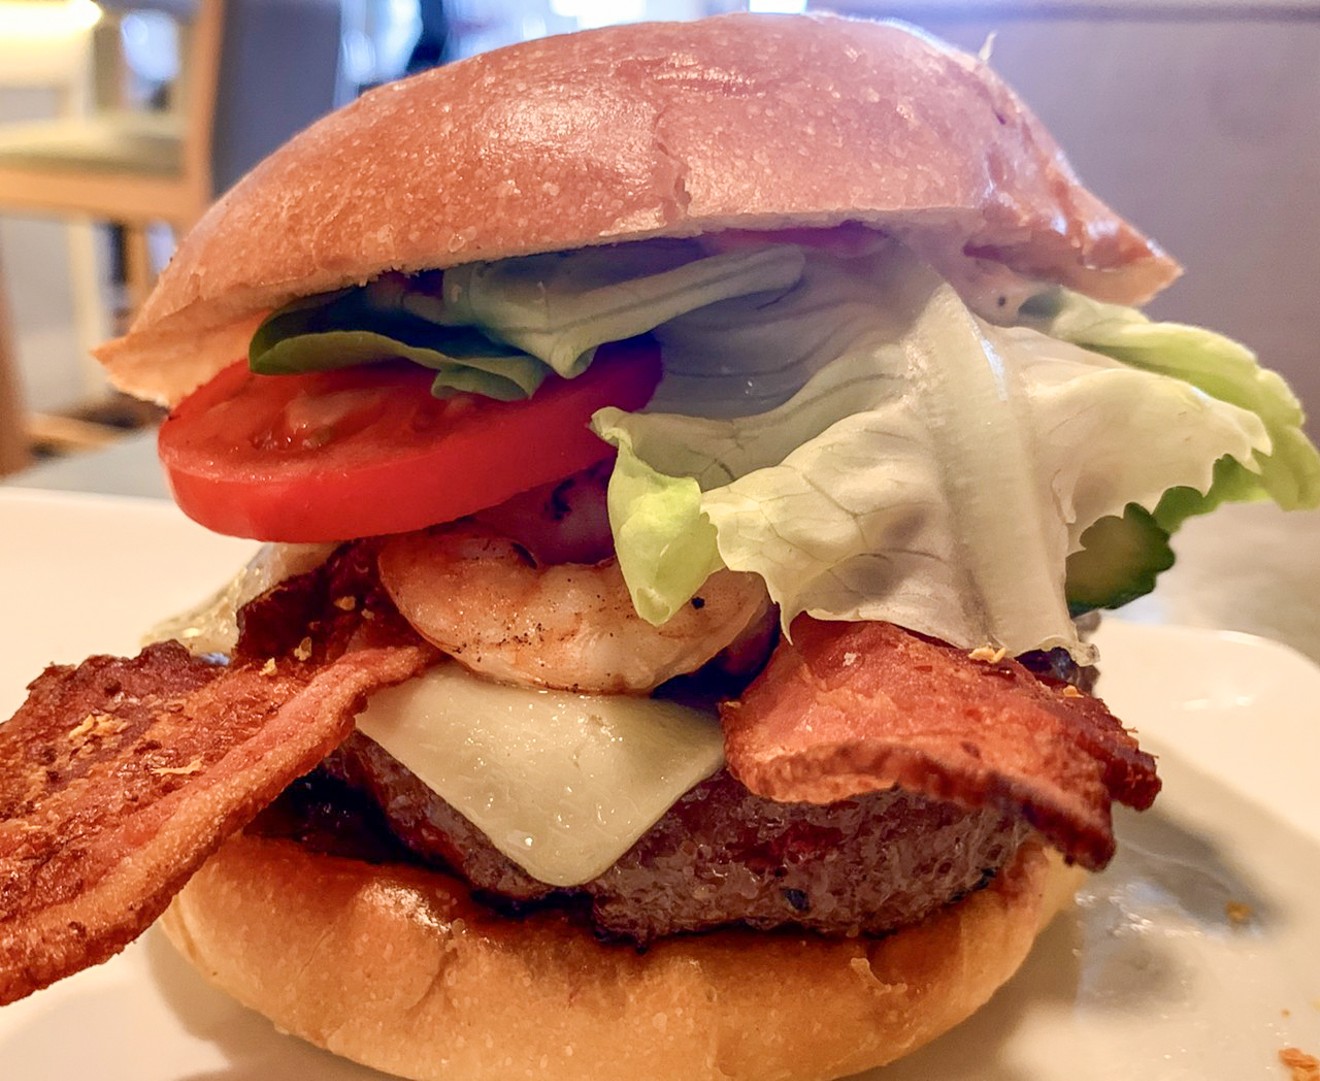 The yacht club burger with bacon, white cheddar, lettuce, tomato, onion and fresh pickles for 16 bucks. Add grilled shrimp — yes, do this — for $5.